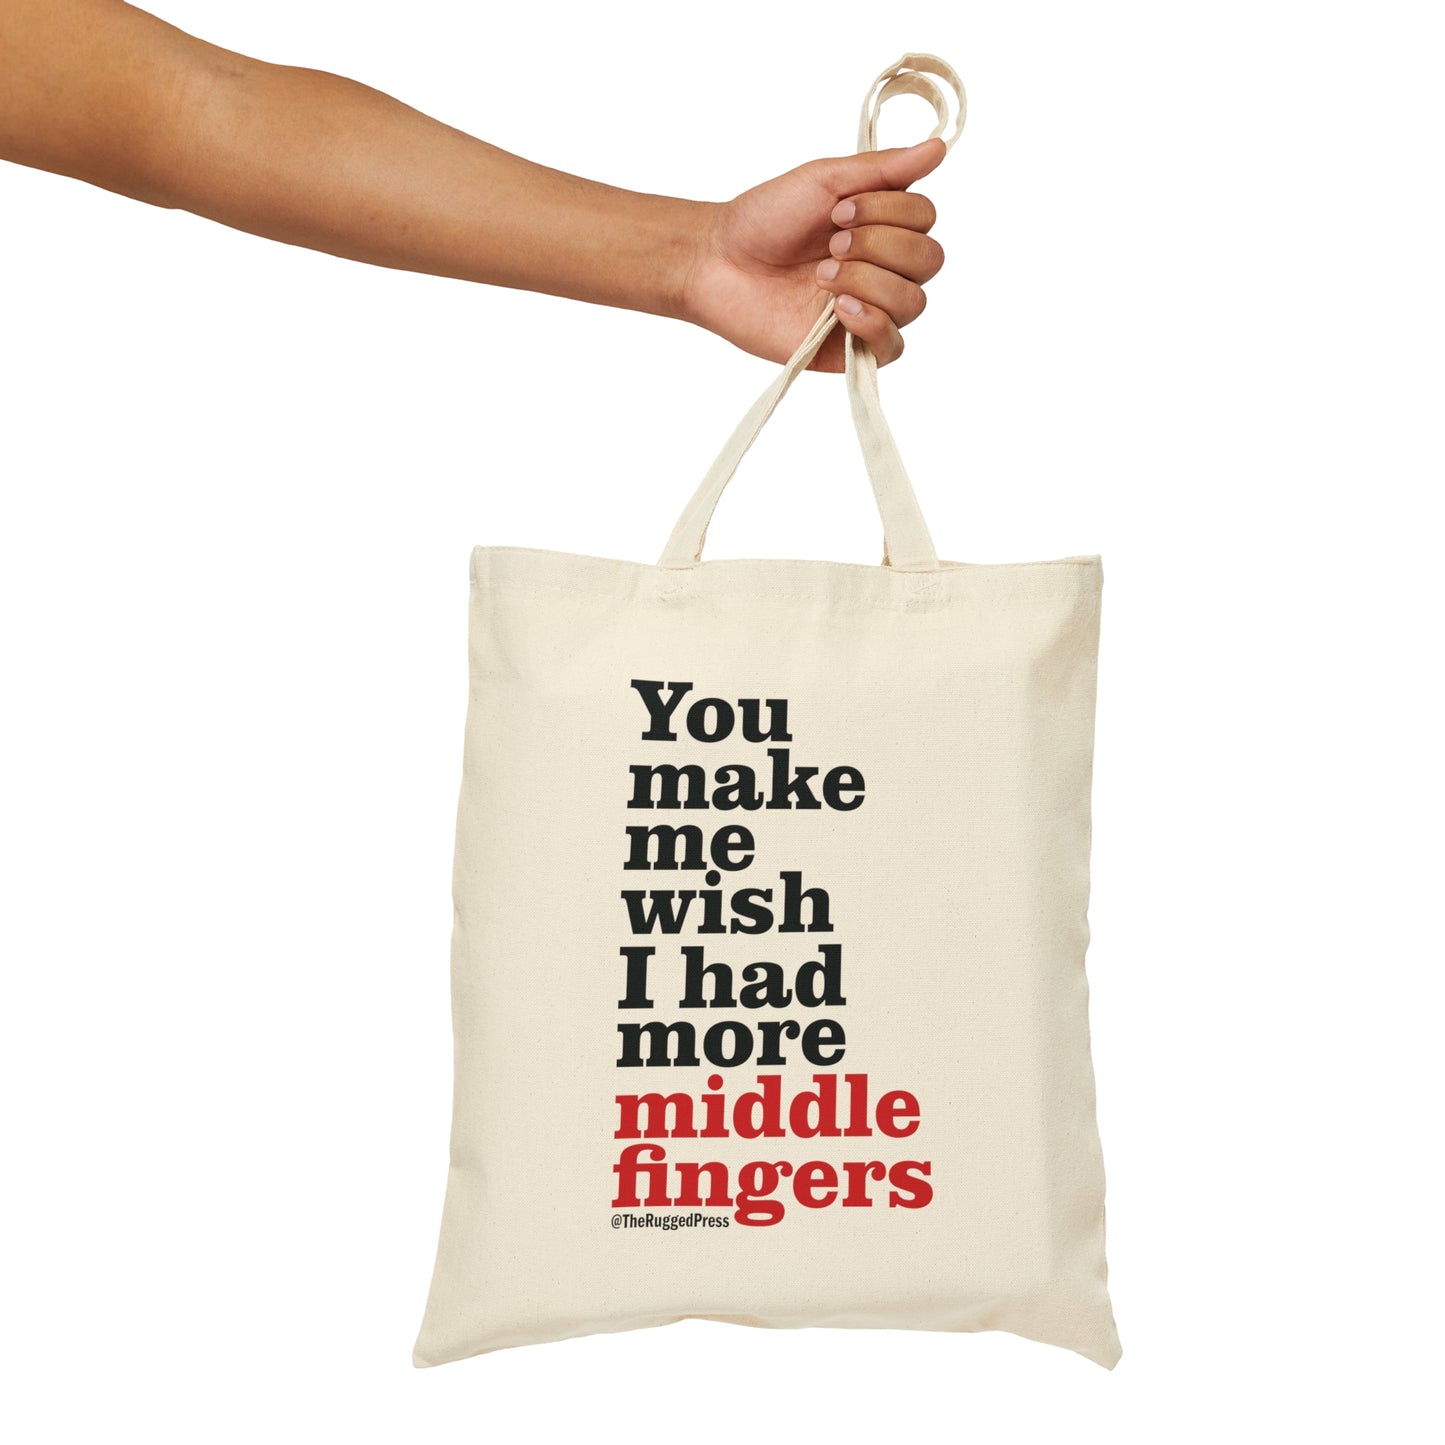 You make me wish I had more middle fingers  – Canvas Tote Bag